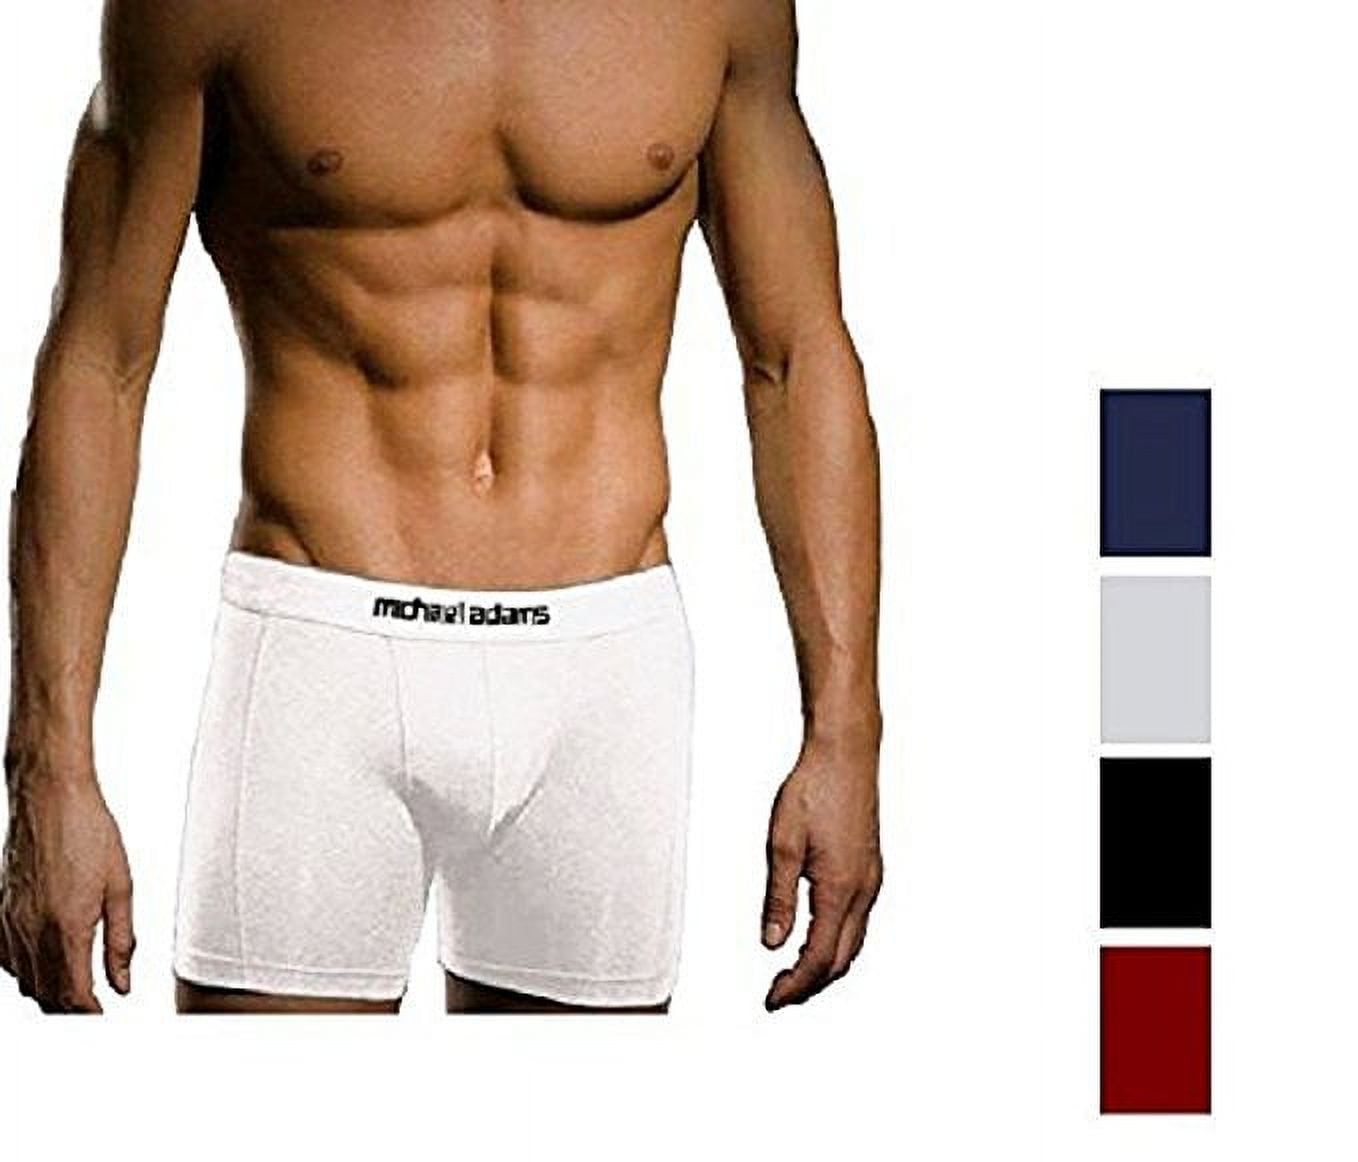 Michael Adams Men's Boxer Brief No-Fly Comfort Waist 6-Pack Assorted Colors  - Large 